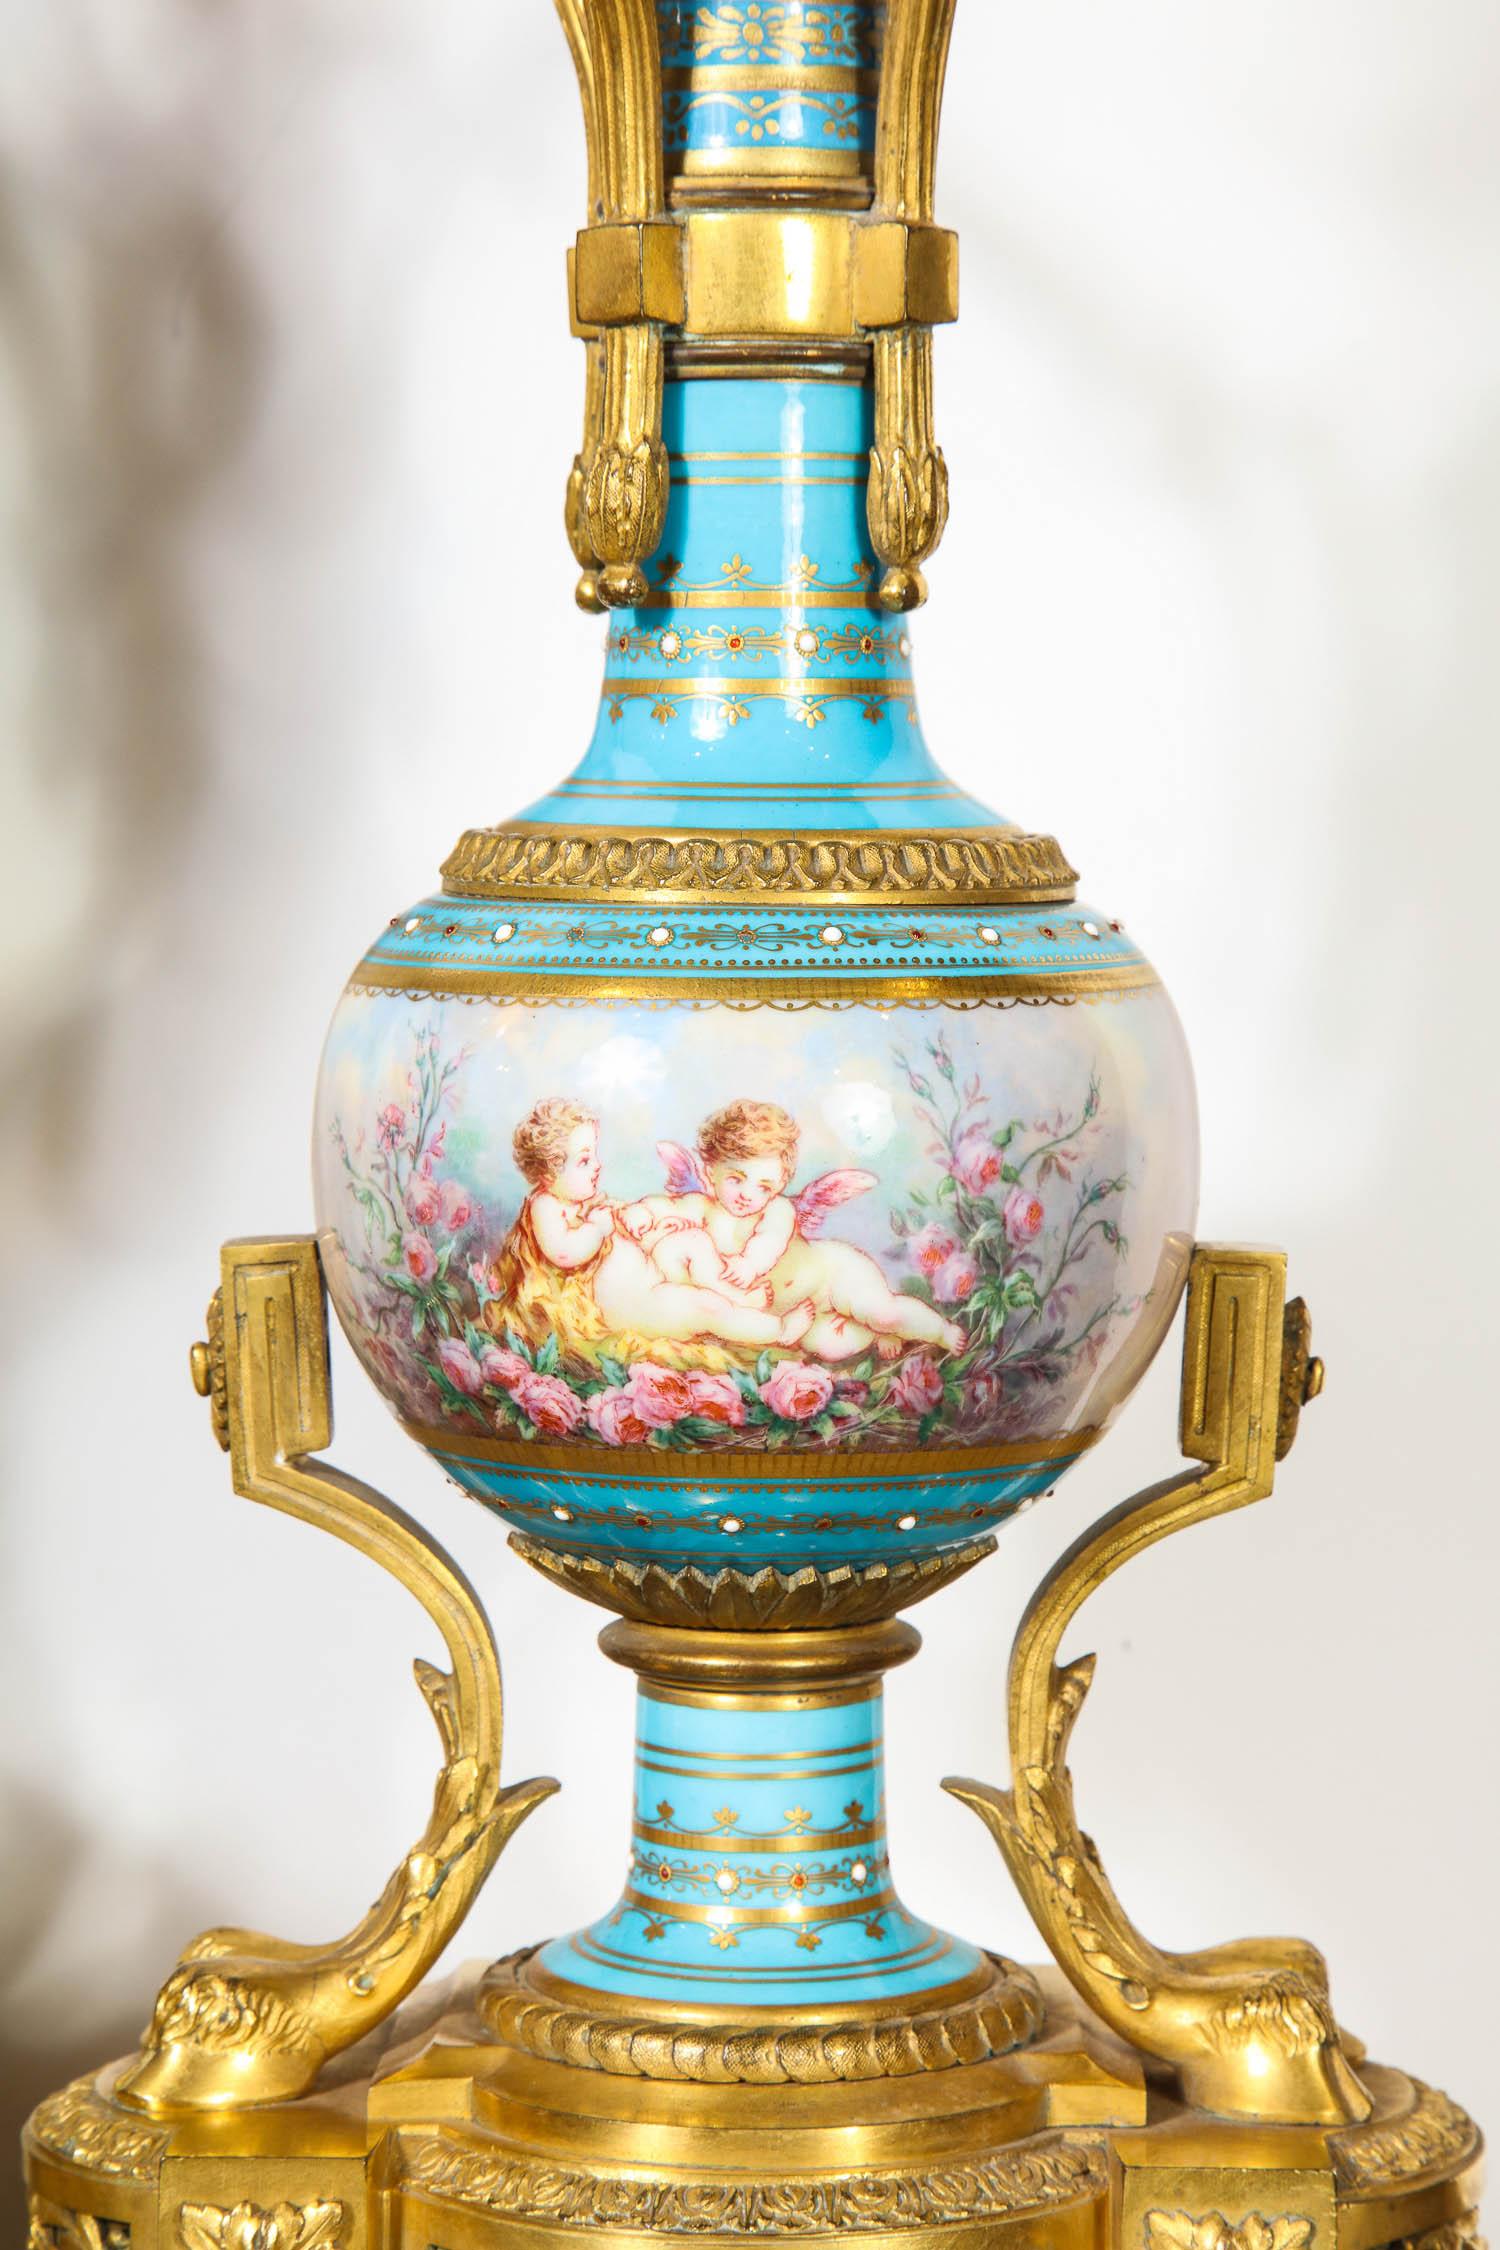 Exceptional French Ormolu-Mounted Turquoise Jeweled Sevres Porcelain Clock Set 2